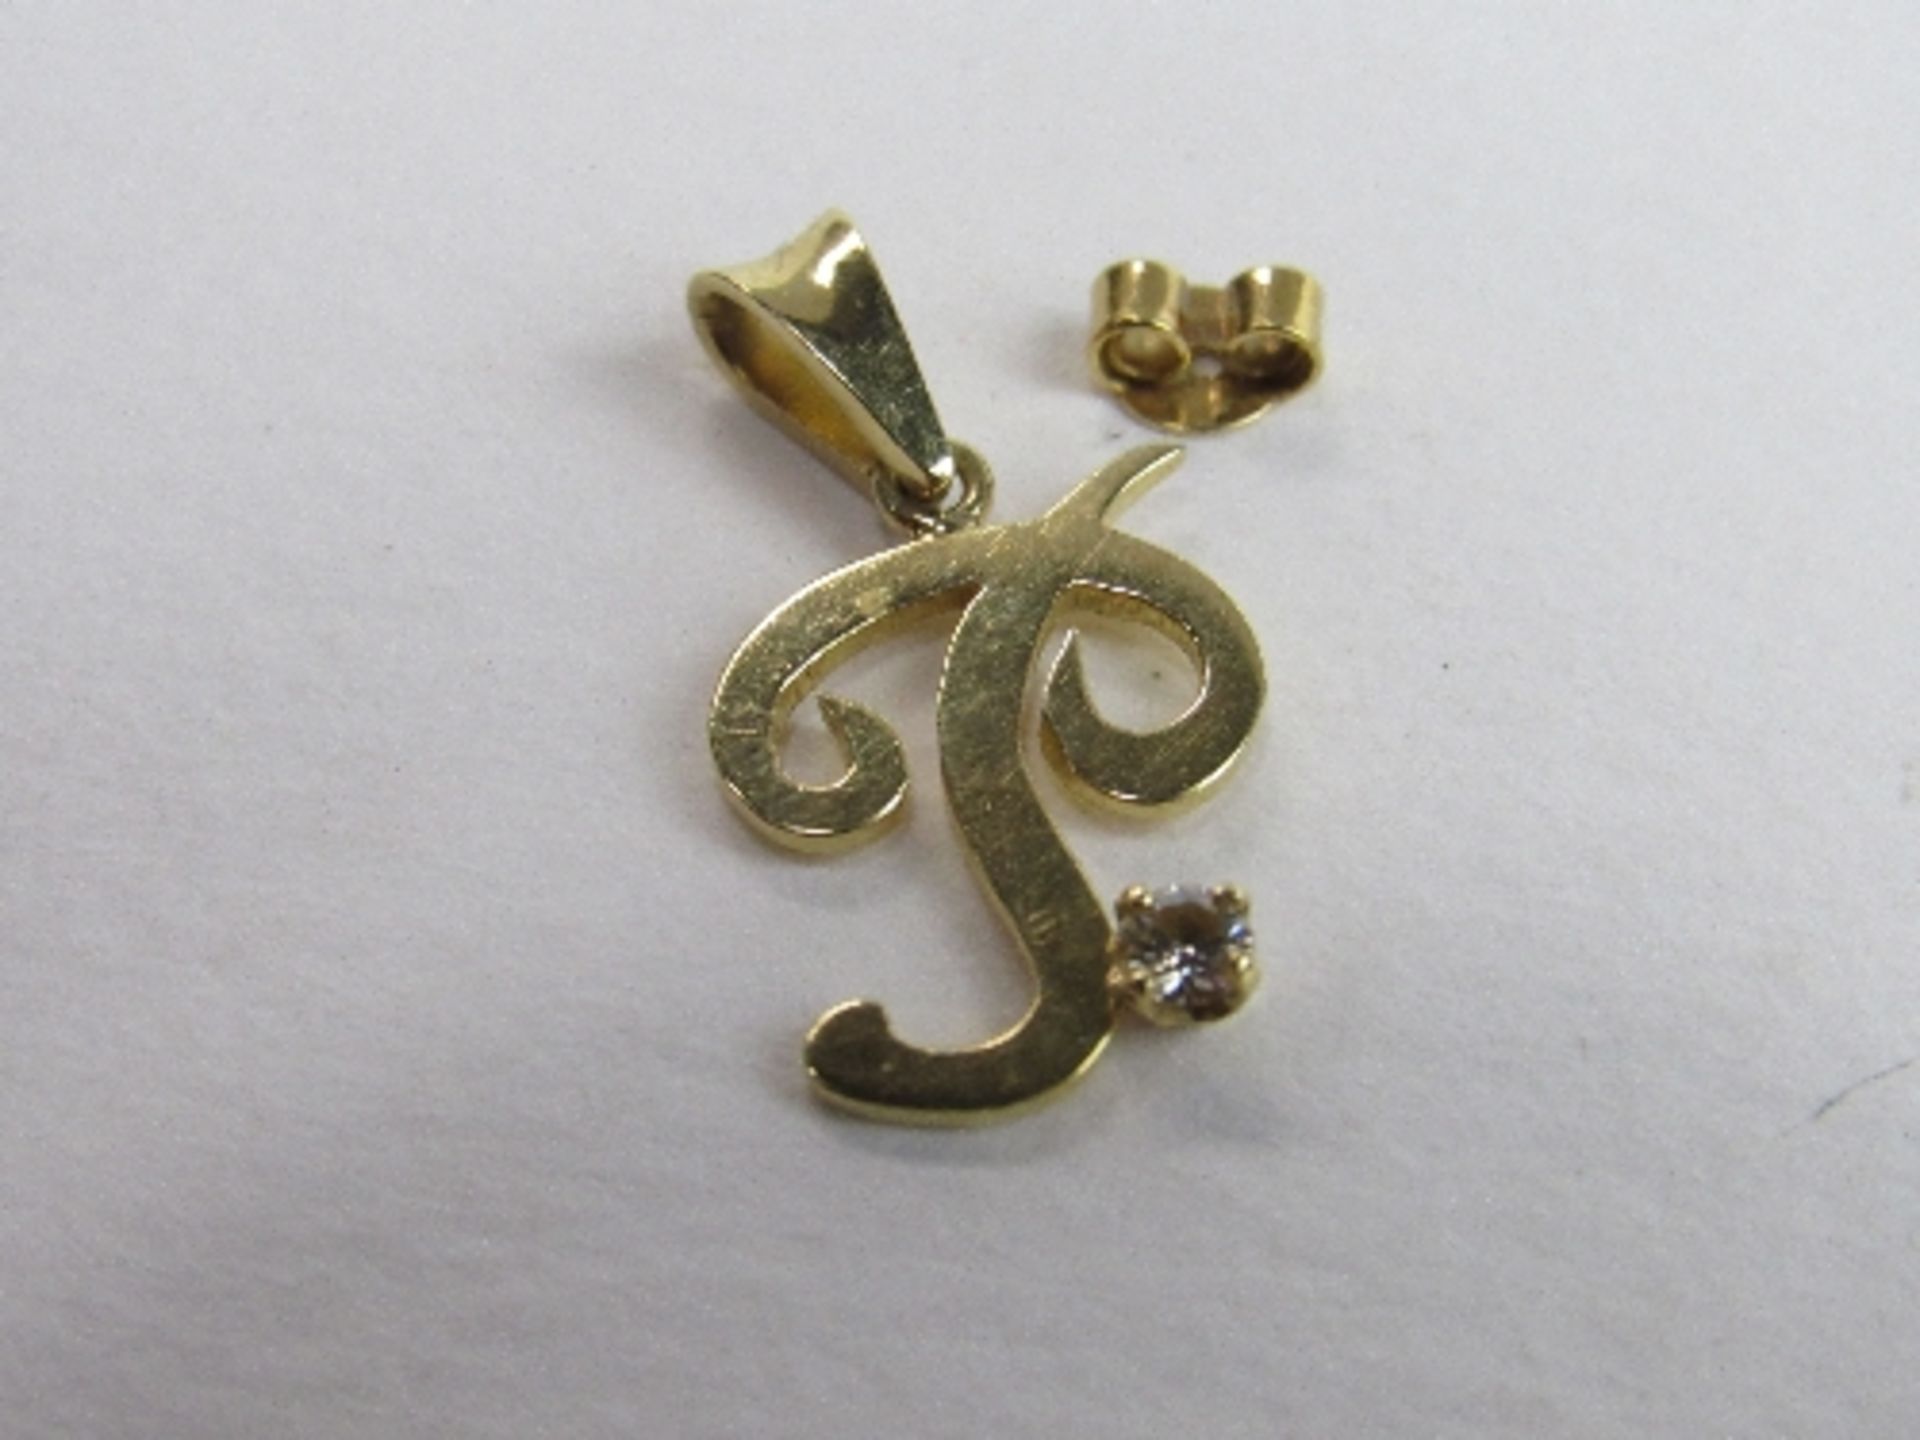 18ct gold & diamond pendant with letter 'P' & 18ct gold earring back, wt 2.7gms. Price guide £40-